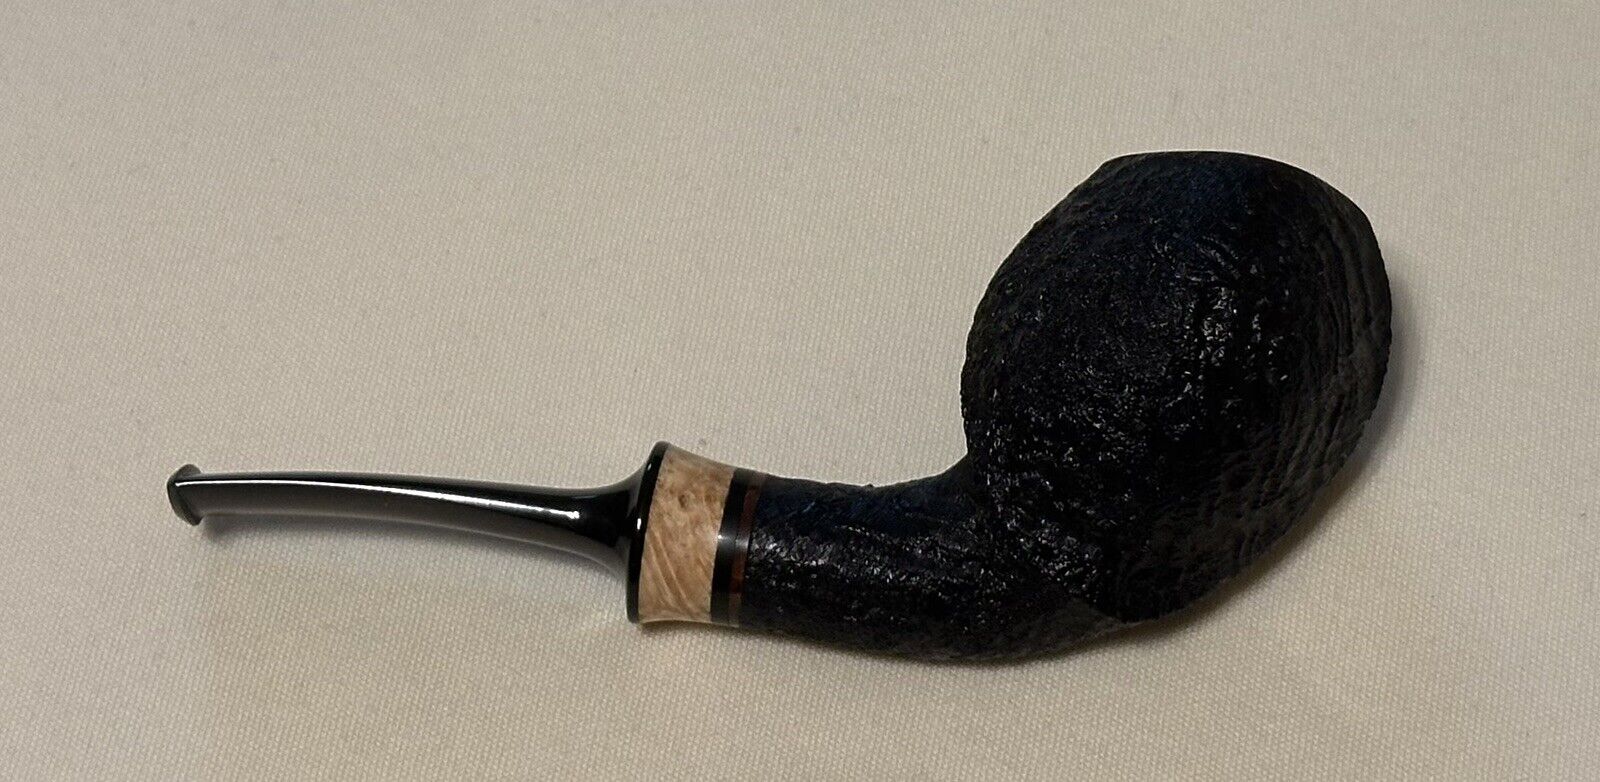 Grant Batson 2017 Pipe, New, Never Smoked, Mint Condition, Place Your Bid Now